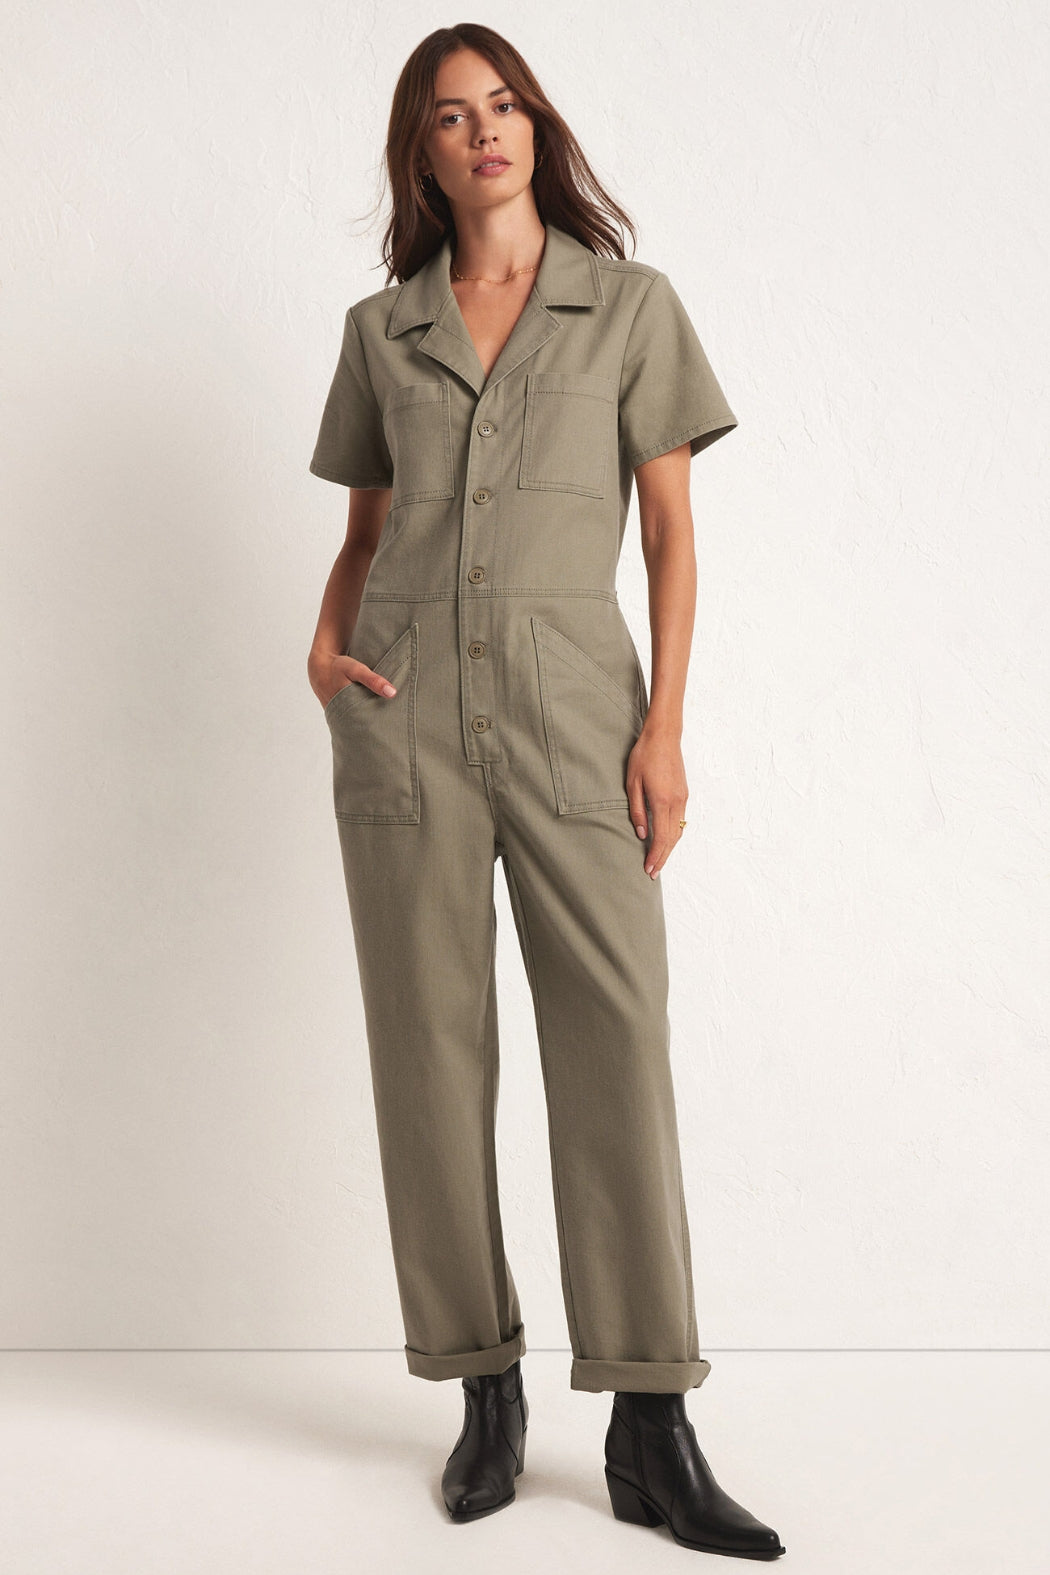 Z Supply Stevie Stretch Twill Jumpsuit *LIMITED TIME 30% OFF WITH CODE:  TAKE30